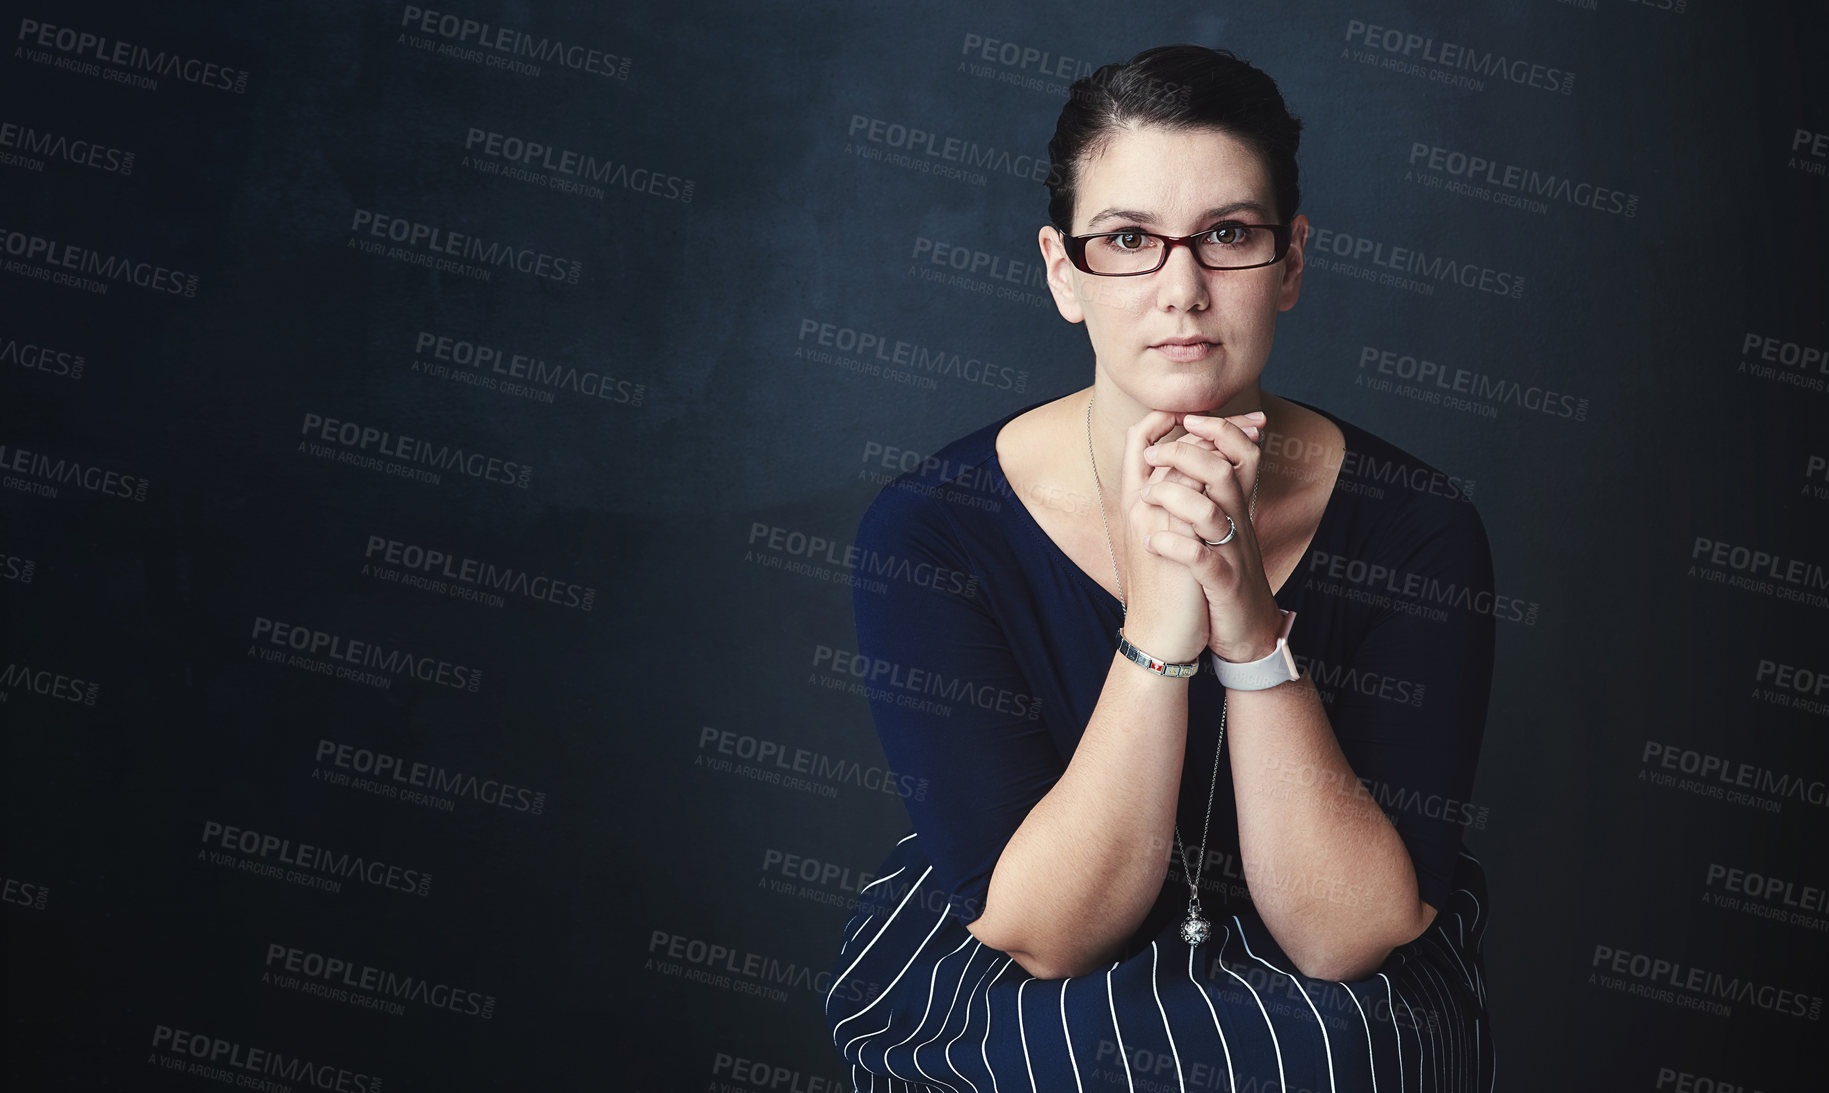 Buy stock photo Studio portrait of a corporate businesswoman posing against a dark background